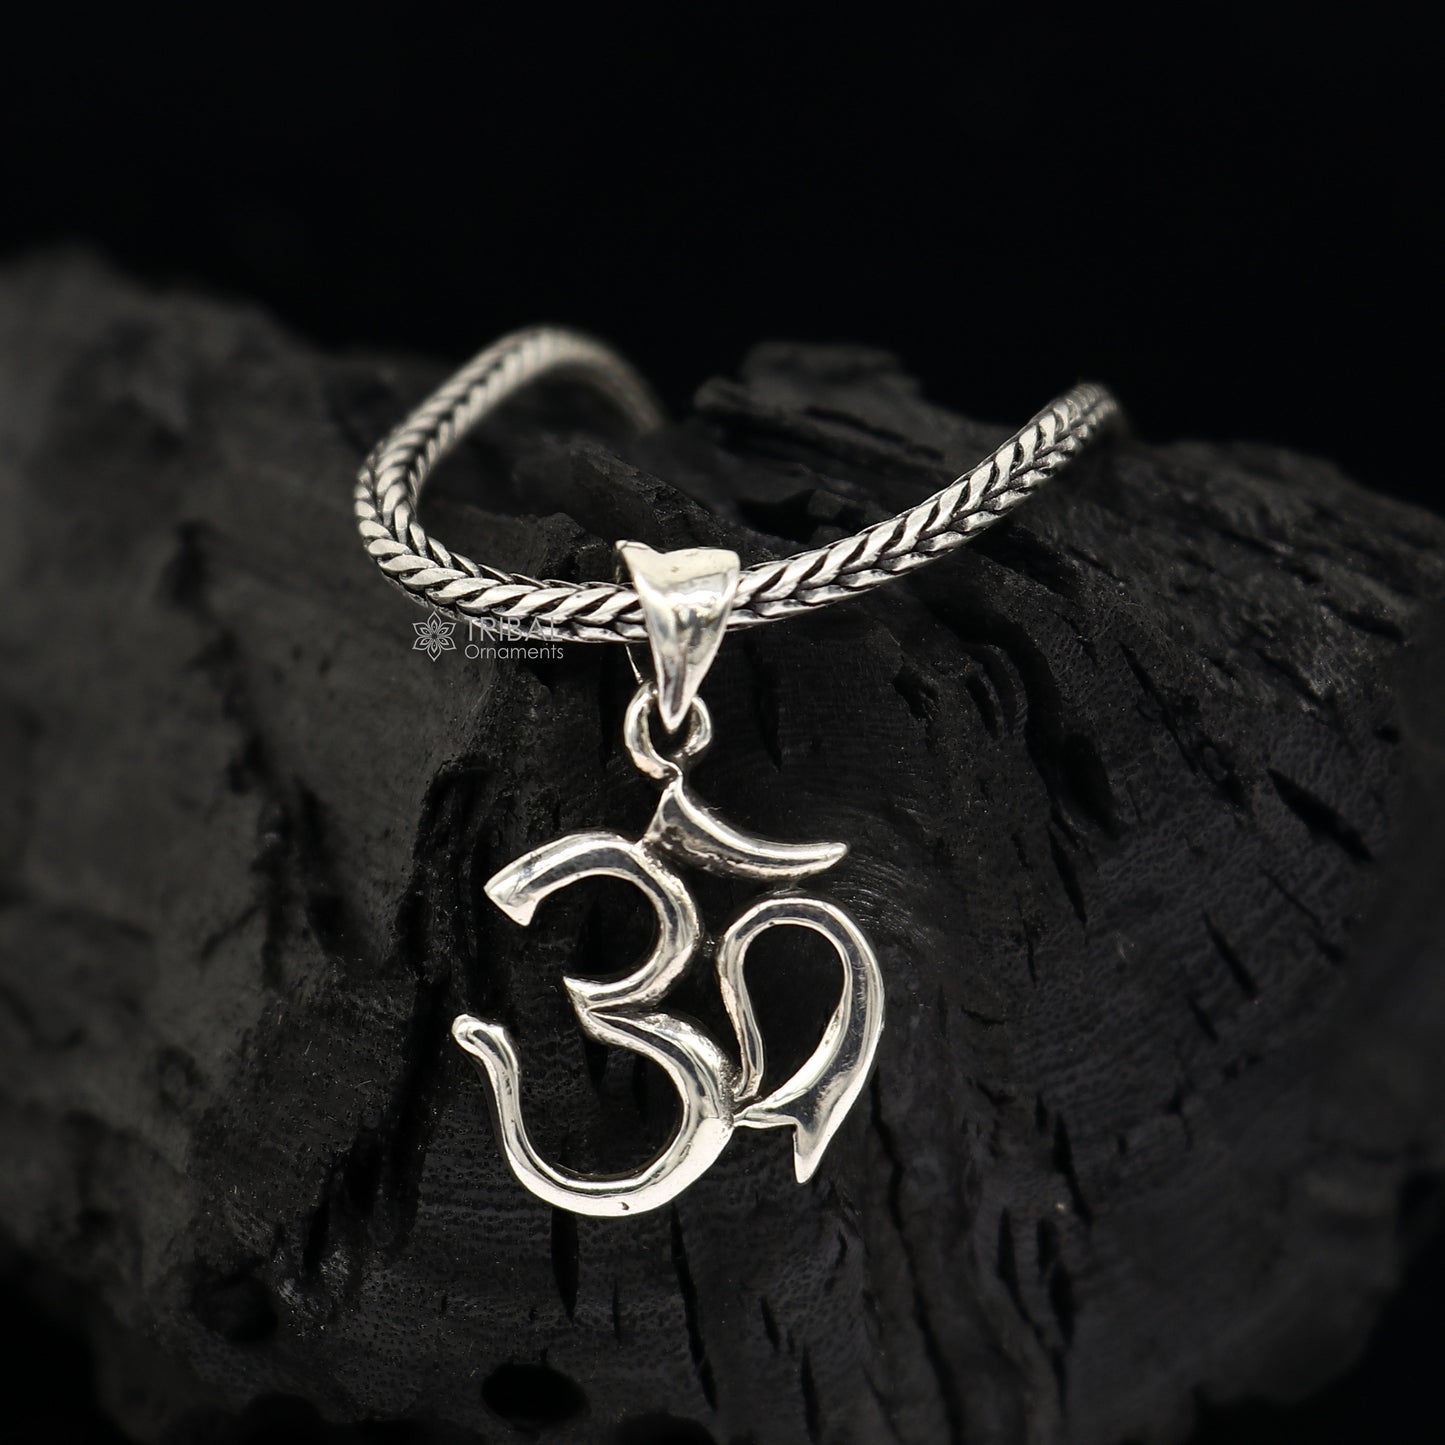 925 sterling silver unique design HINDU Vaidik Mantra Aum OR OM pendant wheat chain necklace locket best gifting jewelry Nsp717 - TRIBAL ORNAMENTS